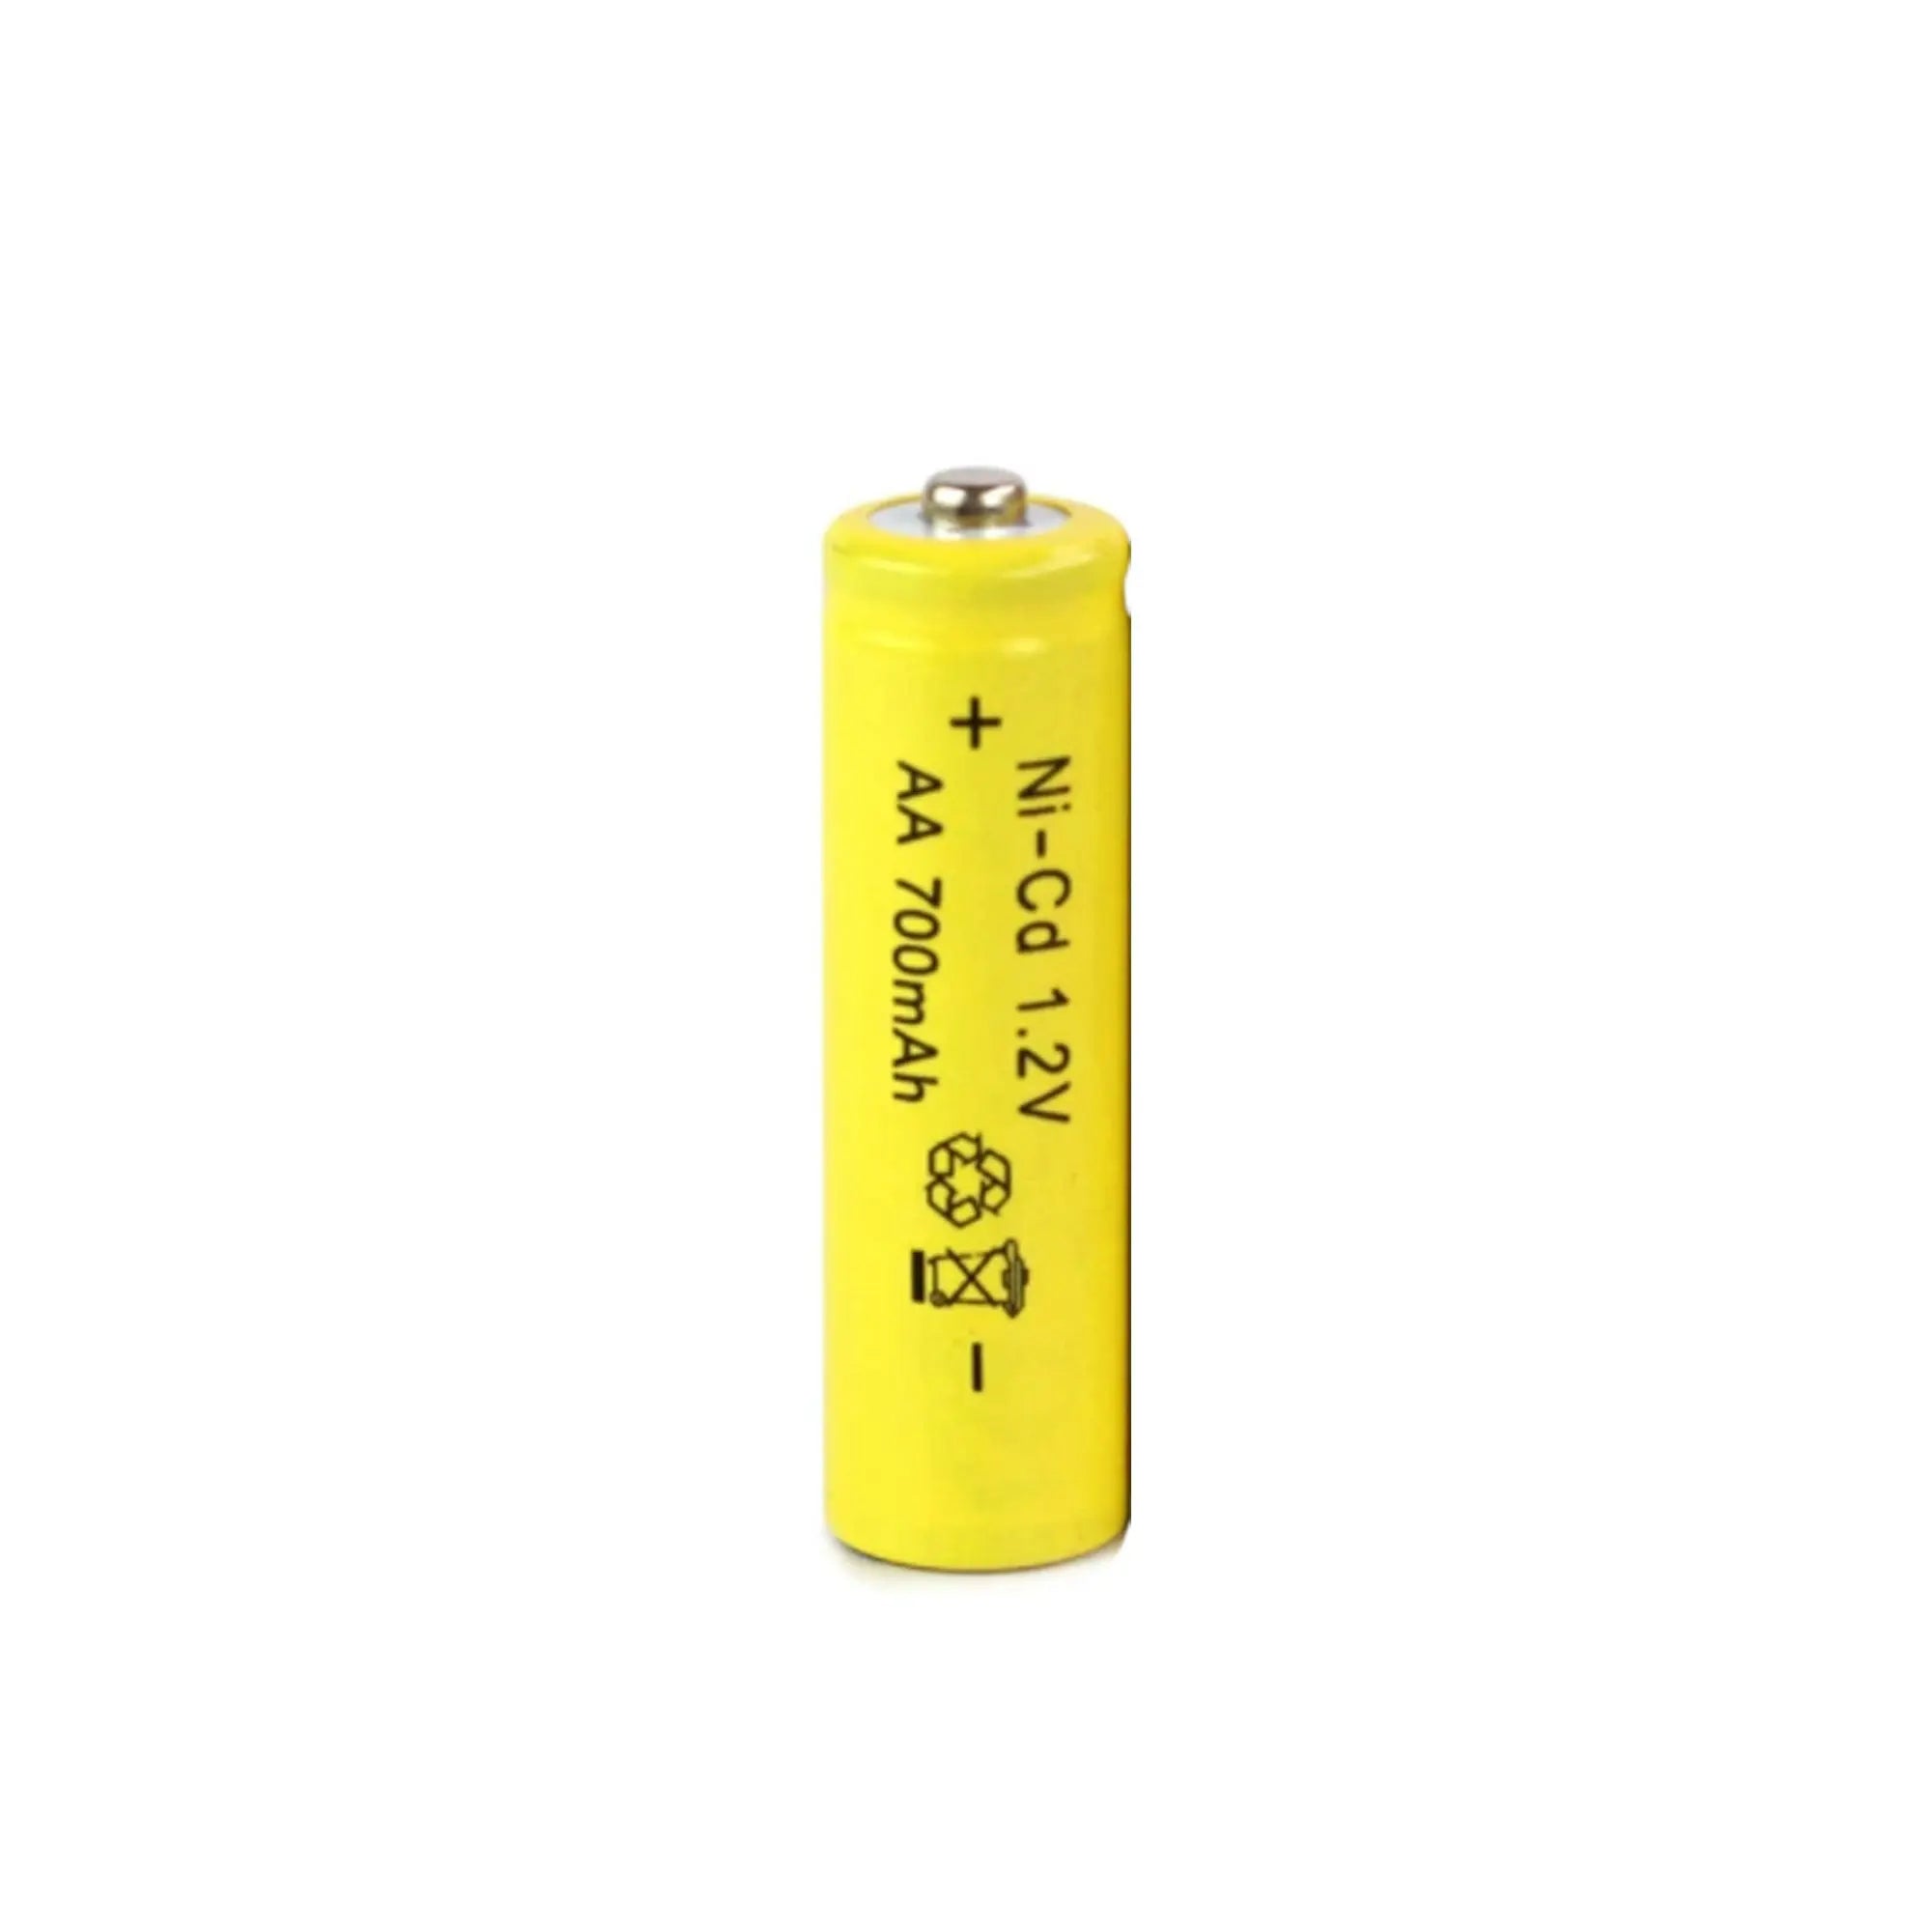 AA Rechargeable Batteries - Size Ni-Cd 700 mAh 1.2 NiCd Nickel Cadmium Battery from Deals499 at Deals499